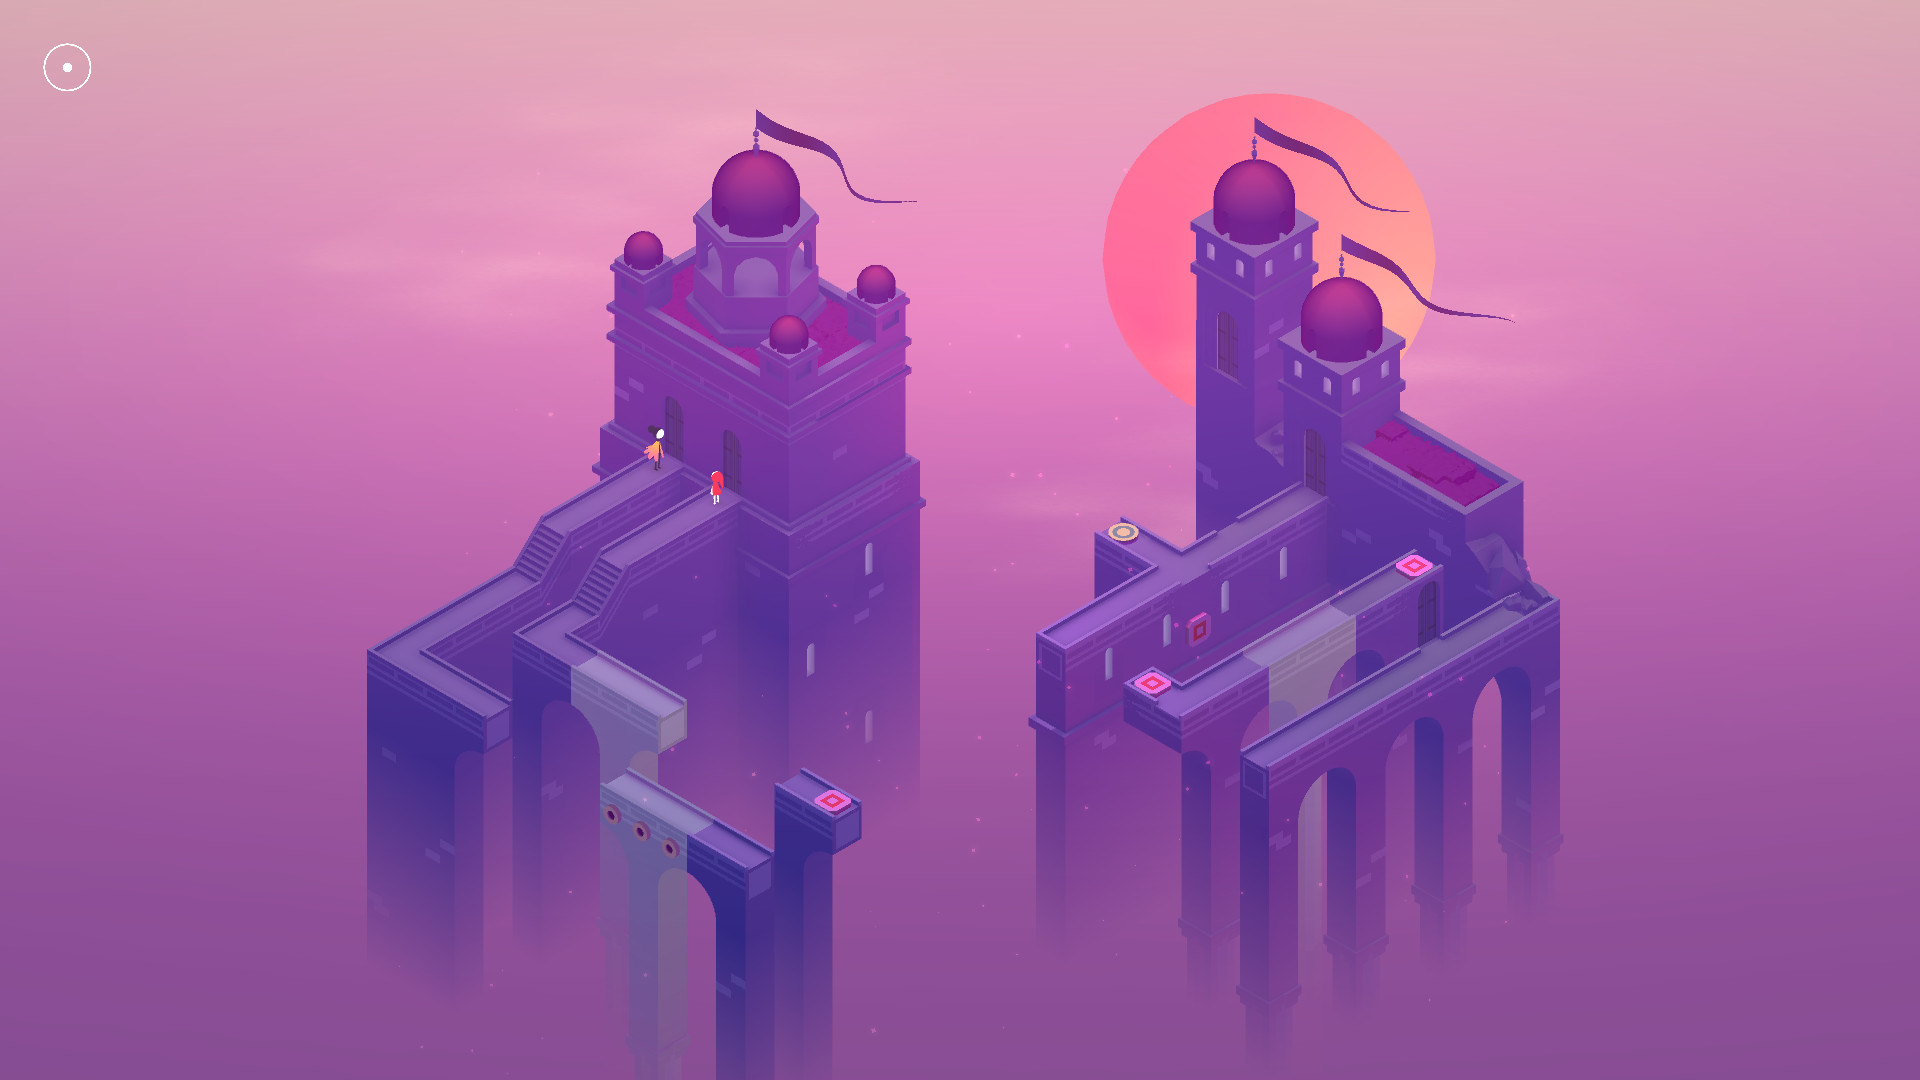 Save 25% On Monument Valley 2: Panoramic Edition On Steam